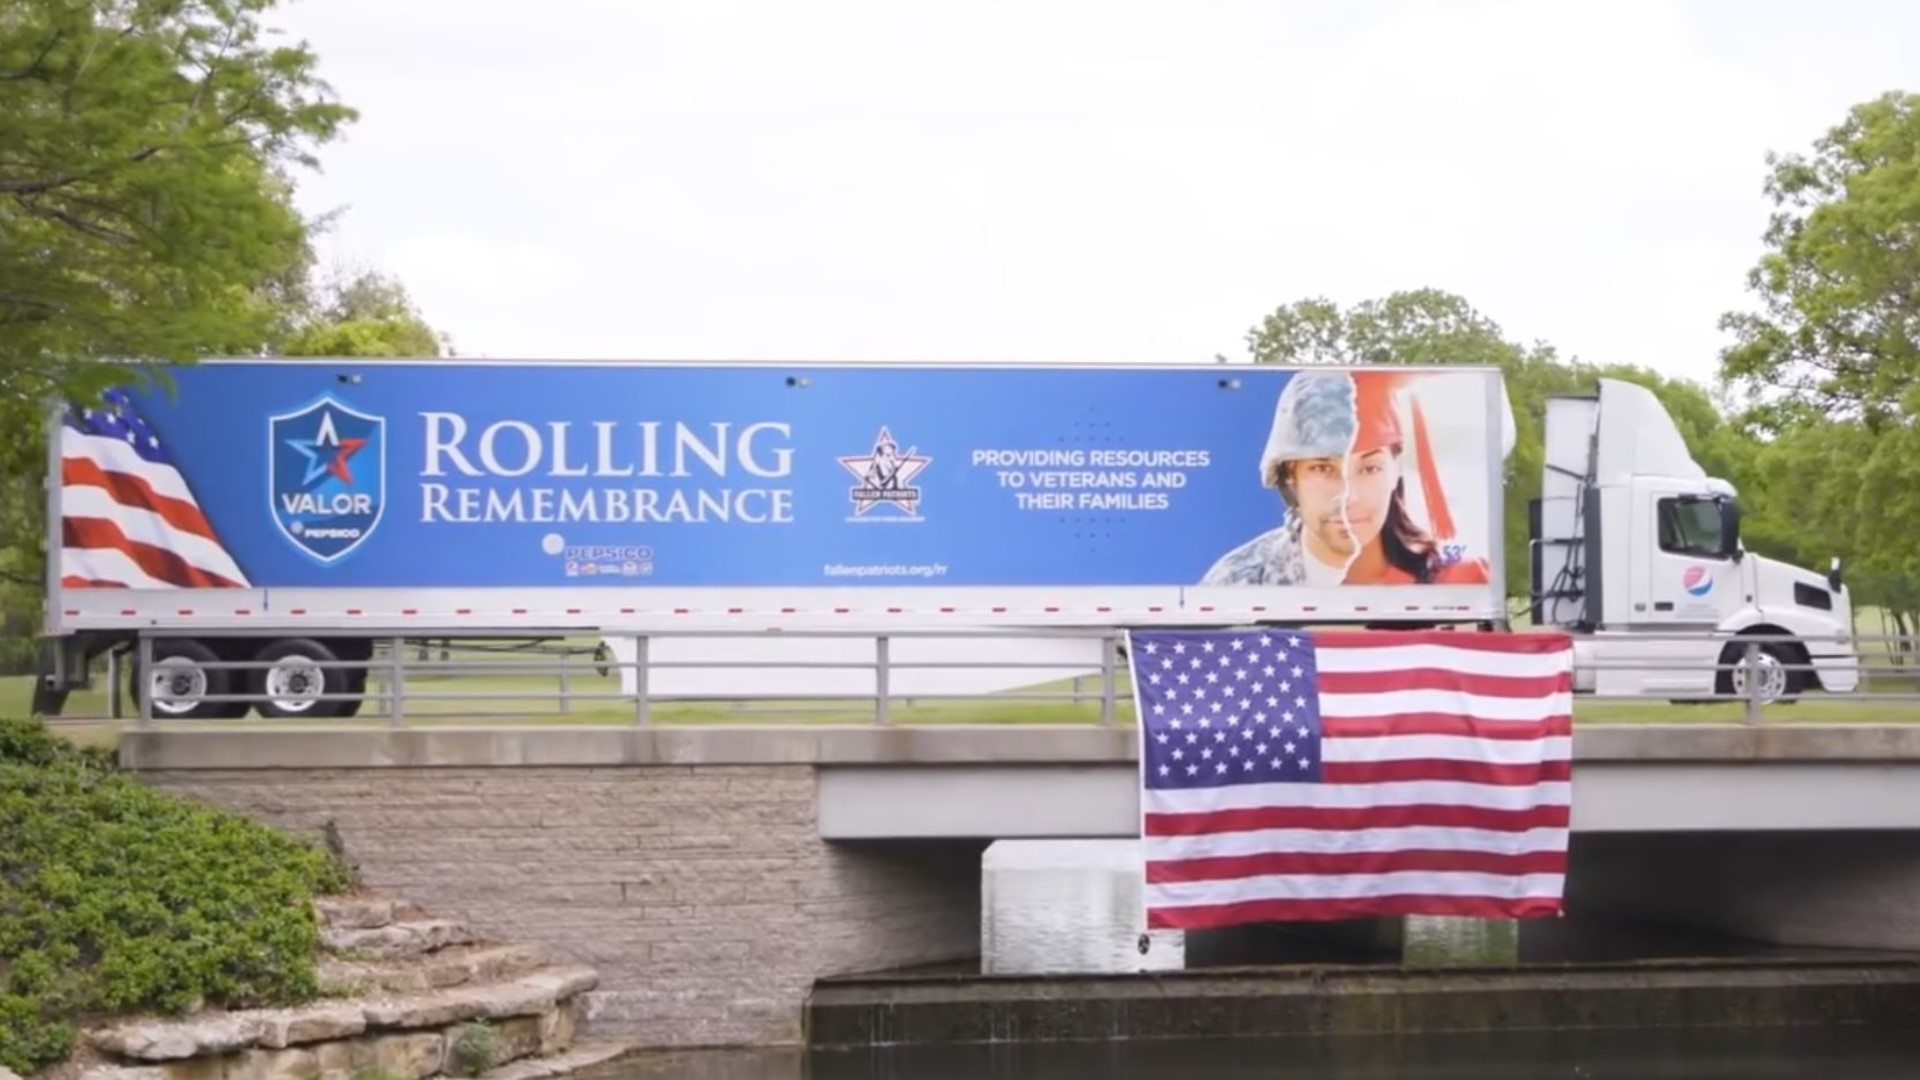 "I have to protect the flag, at all costs," said Otis Howell next to a semi trailer with "Rolling Remembrance" painted on the side. "That's what I feel about it."